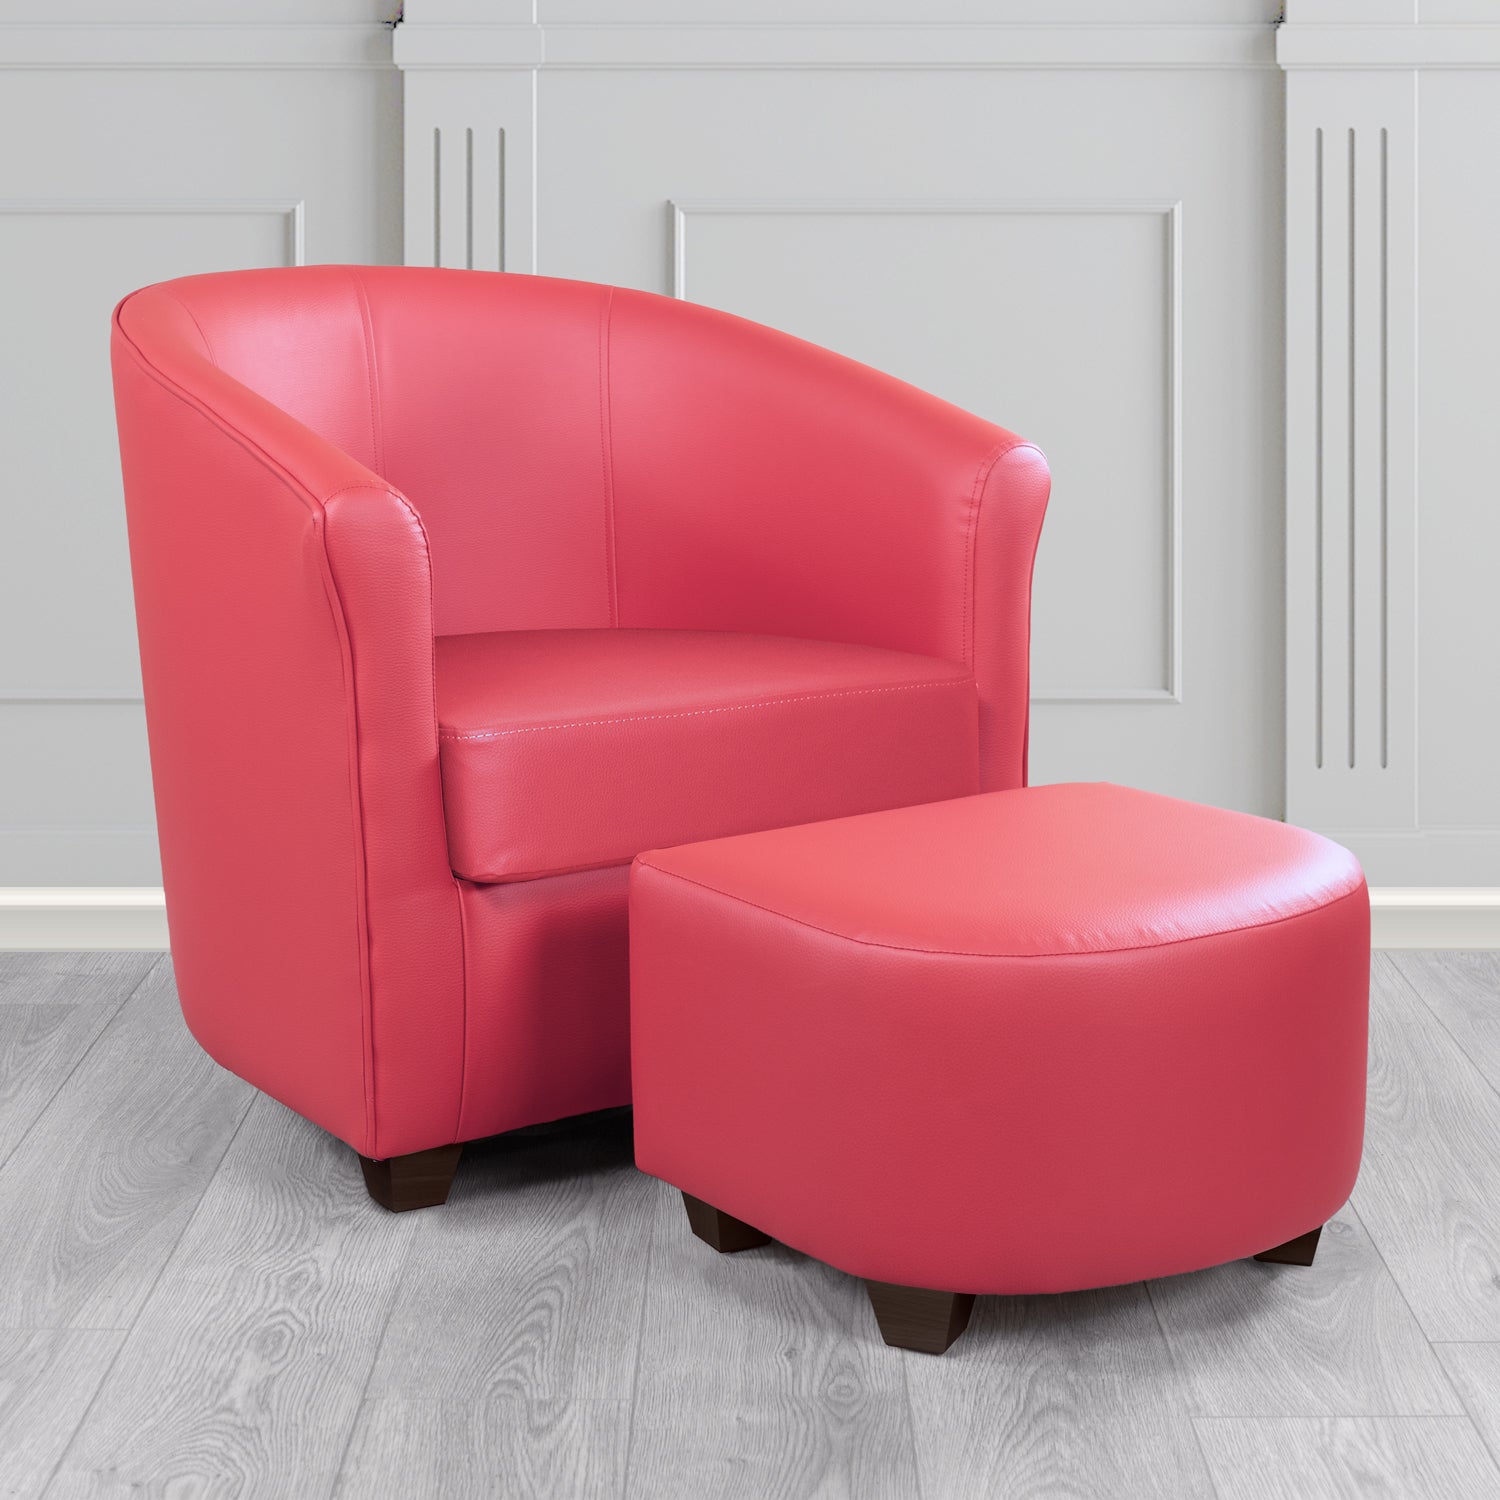 Cannes Tub Chair with Footstool Set in Just Colour Bubblegum Crib 5 Faux Leather - The Tub Chair Shop